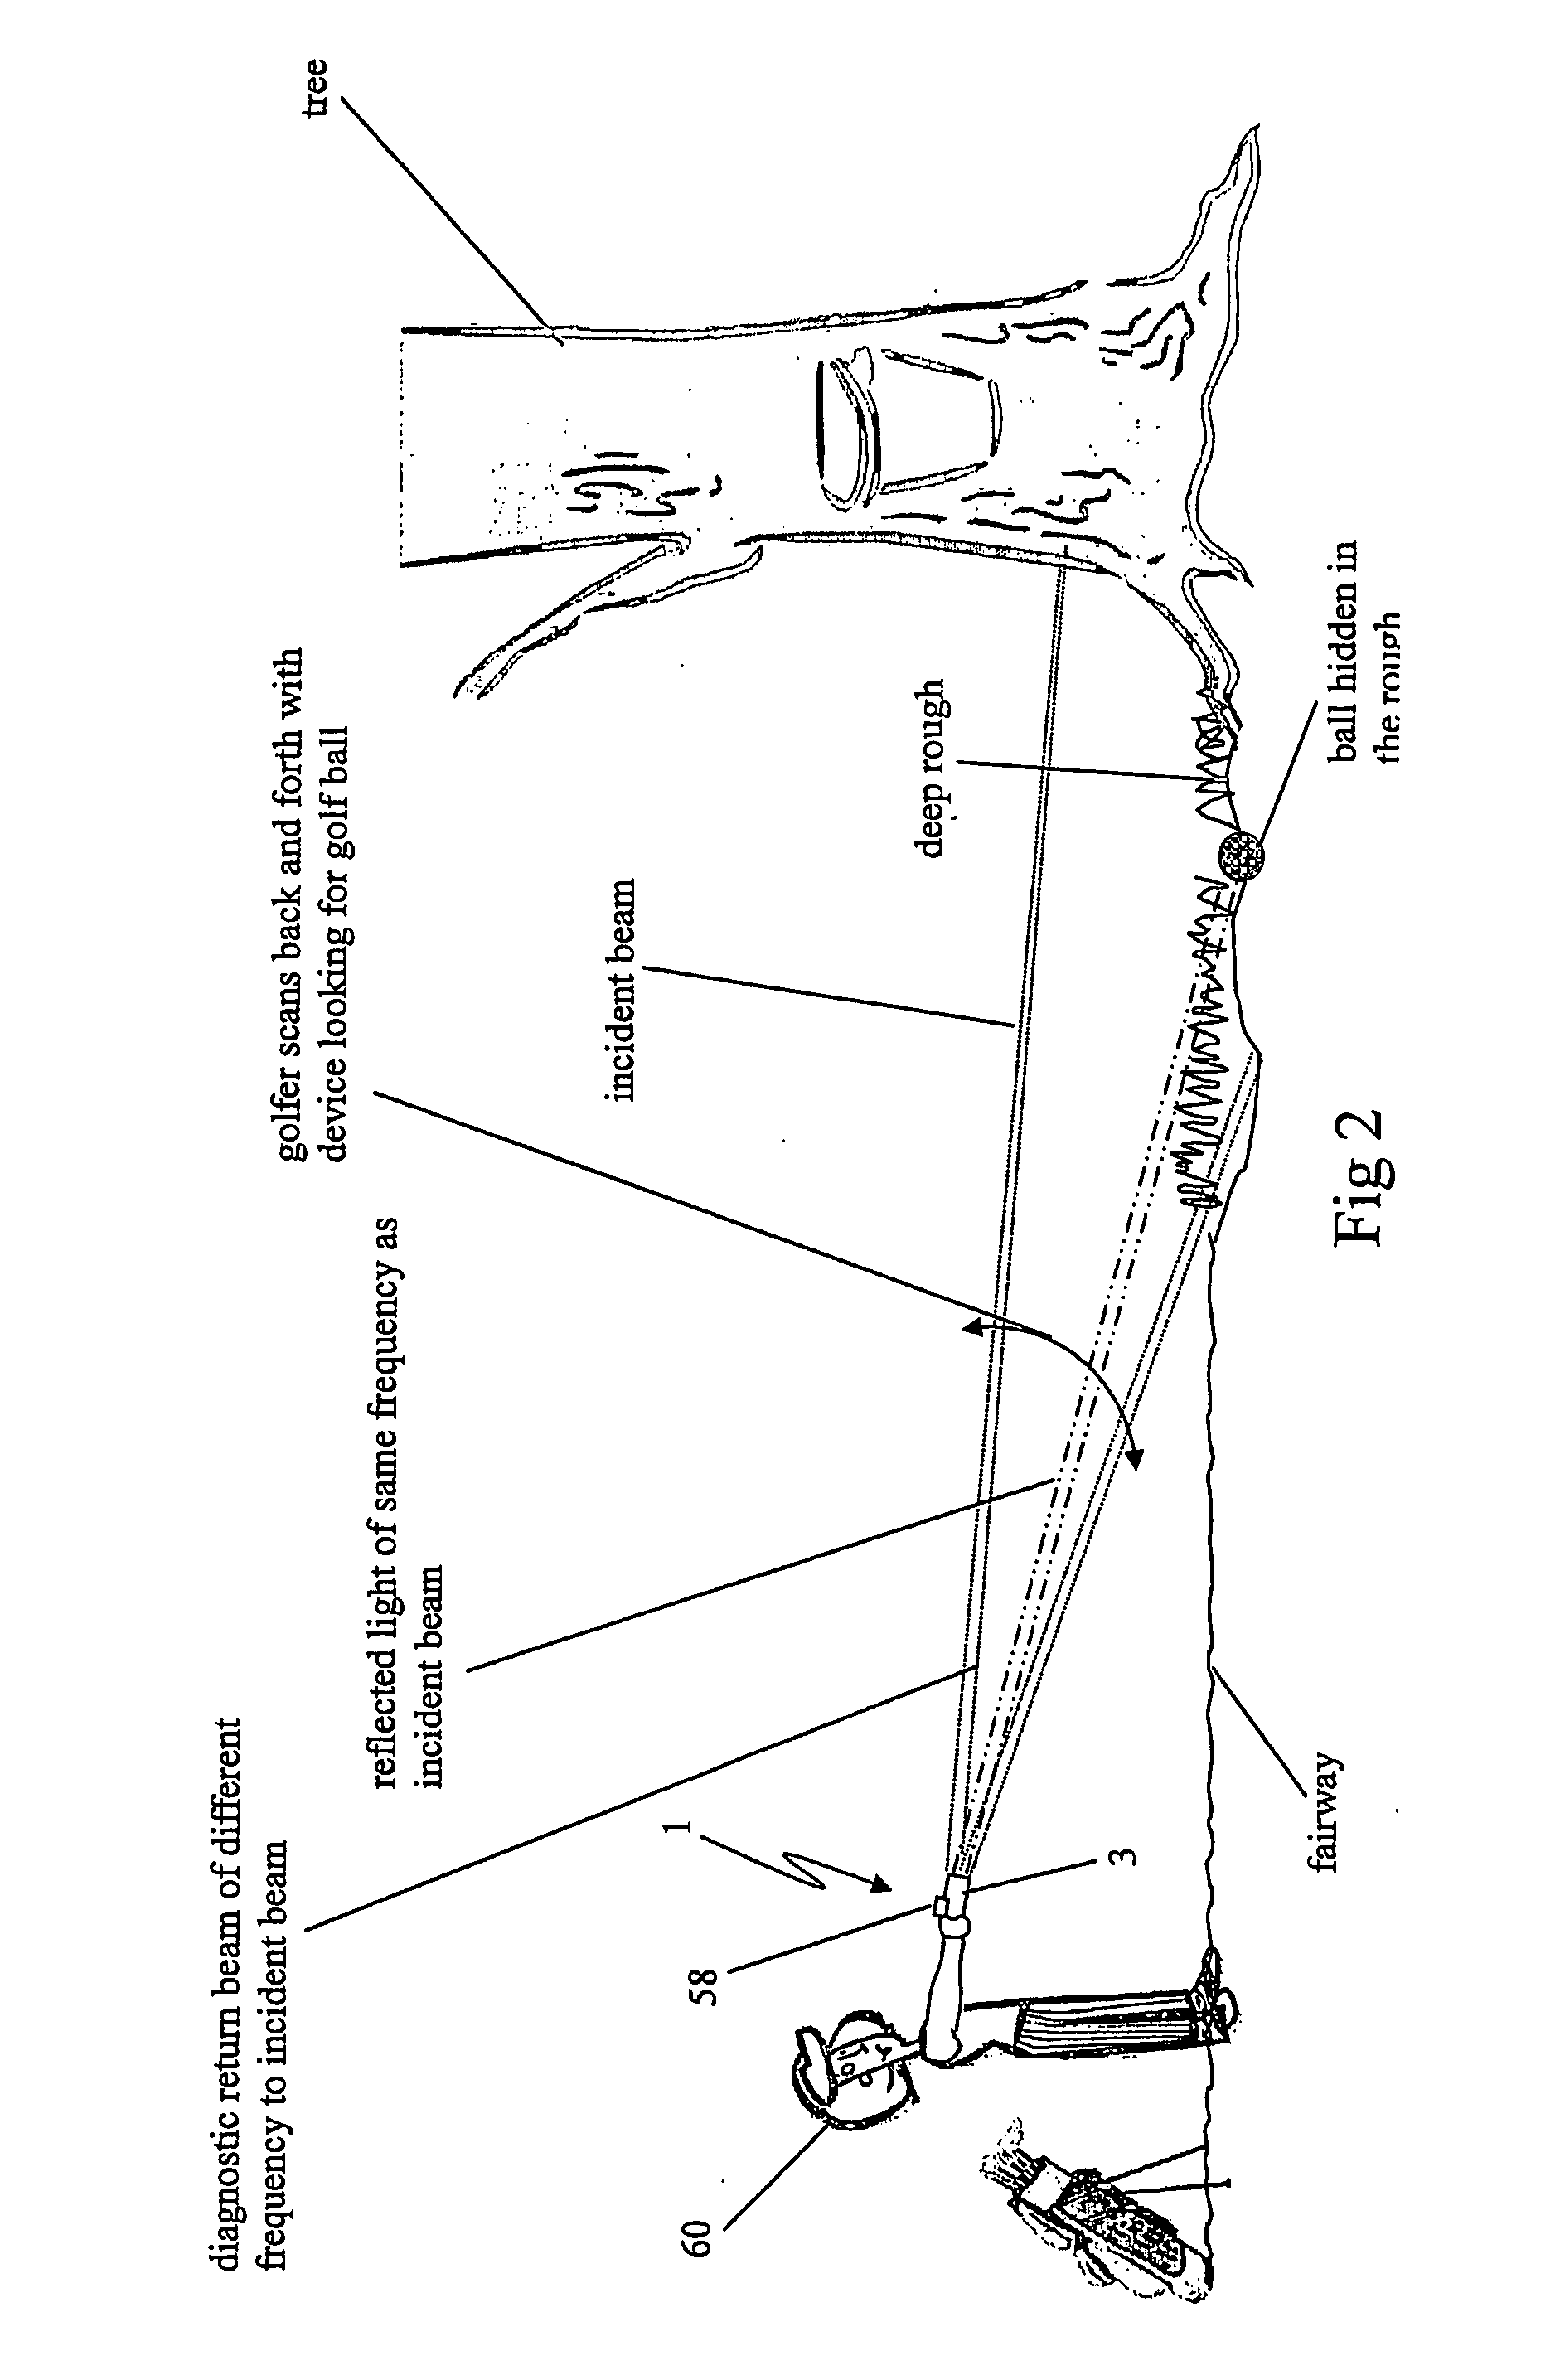 Device For Assisting In Finding An Article